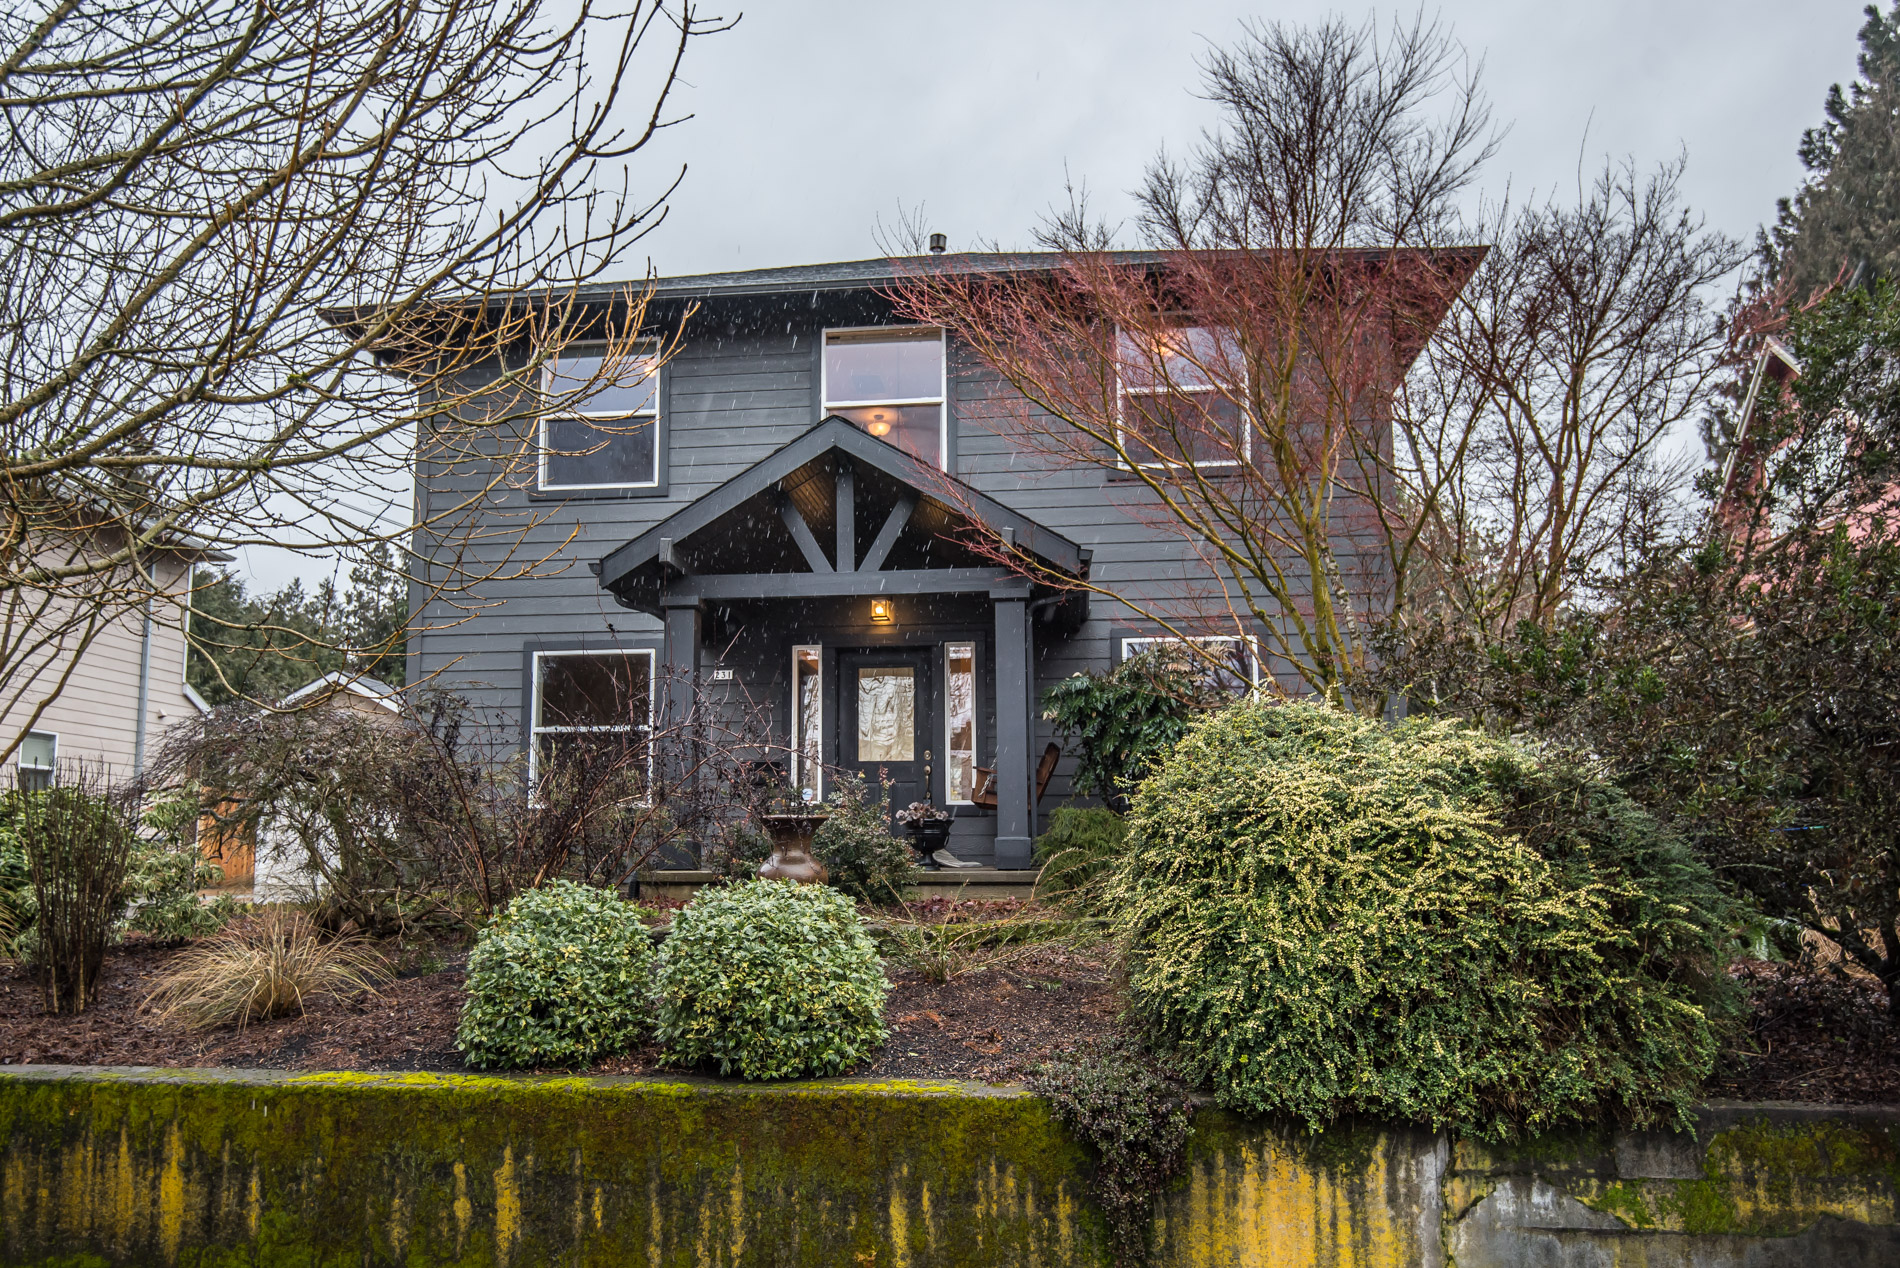 Sold for $687,500 in 7 Days on the Market! 231 SE 55th Ave., Portland 97215